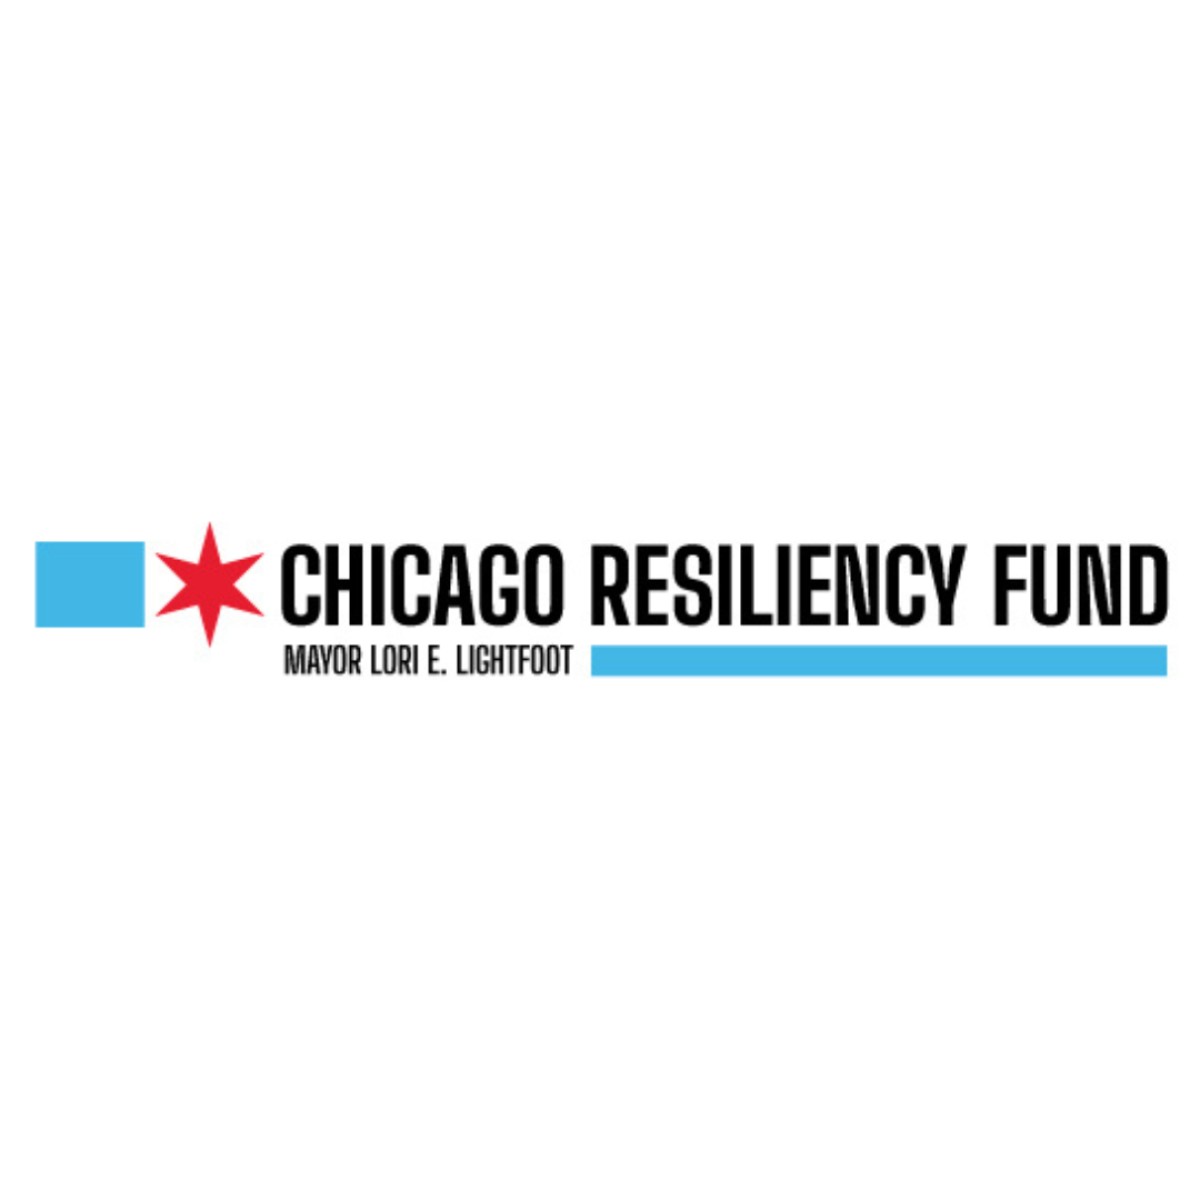 Chicago Resiliency Fund 2.0 offers aid to domestic workers